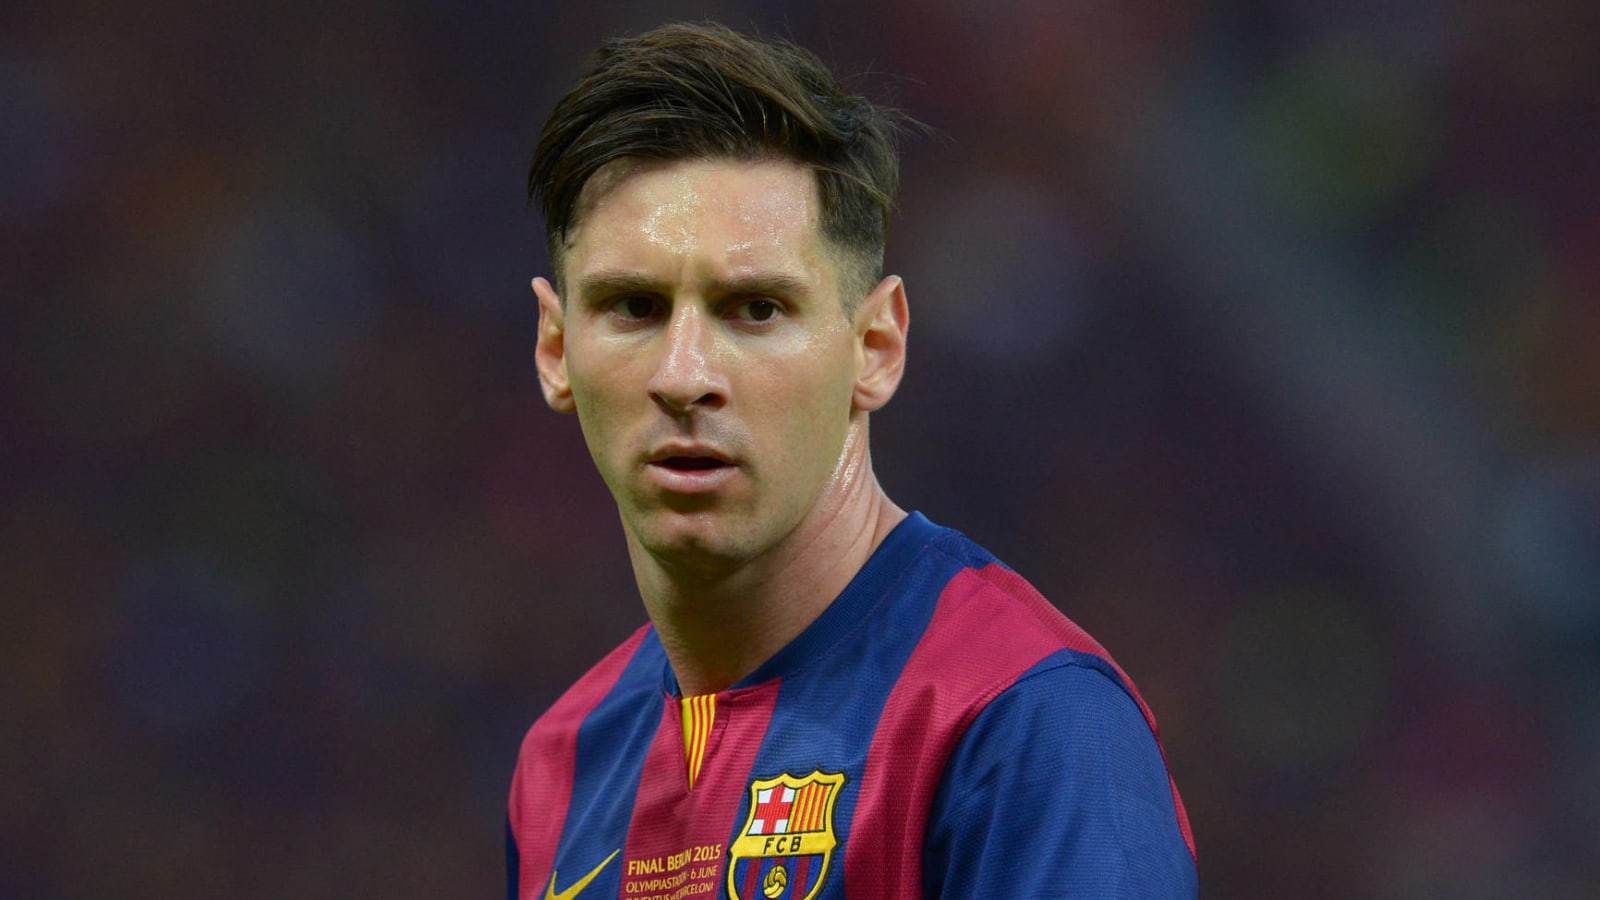 Lionel Messi follows through with threat, misses Barcelona's COVID-19 testing